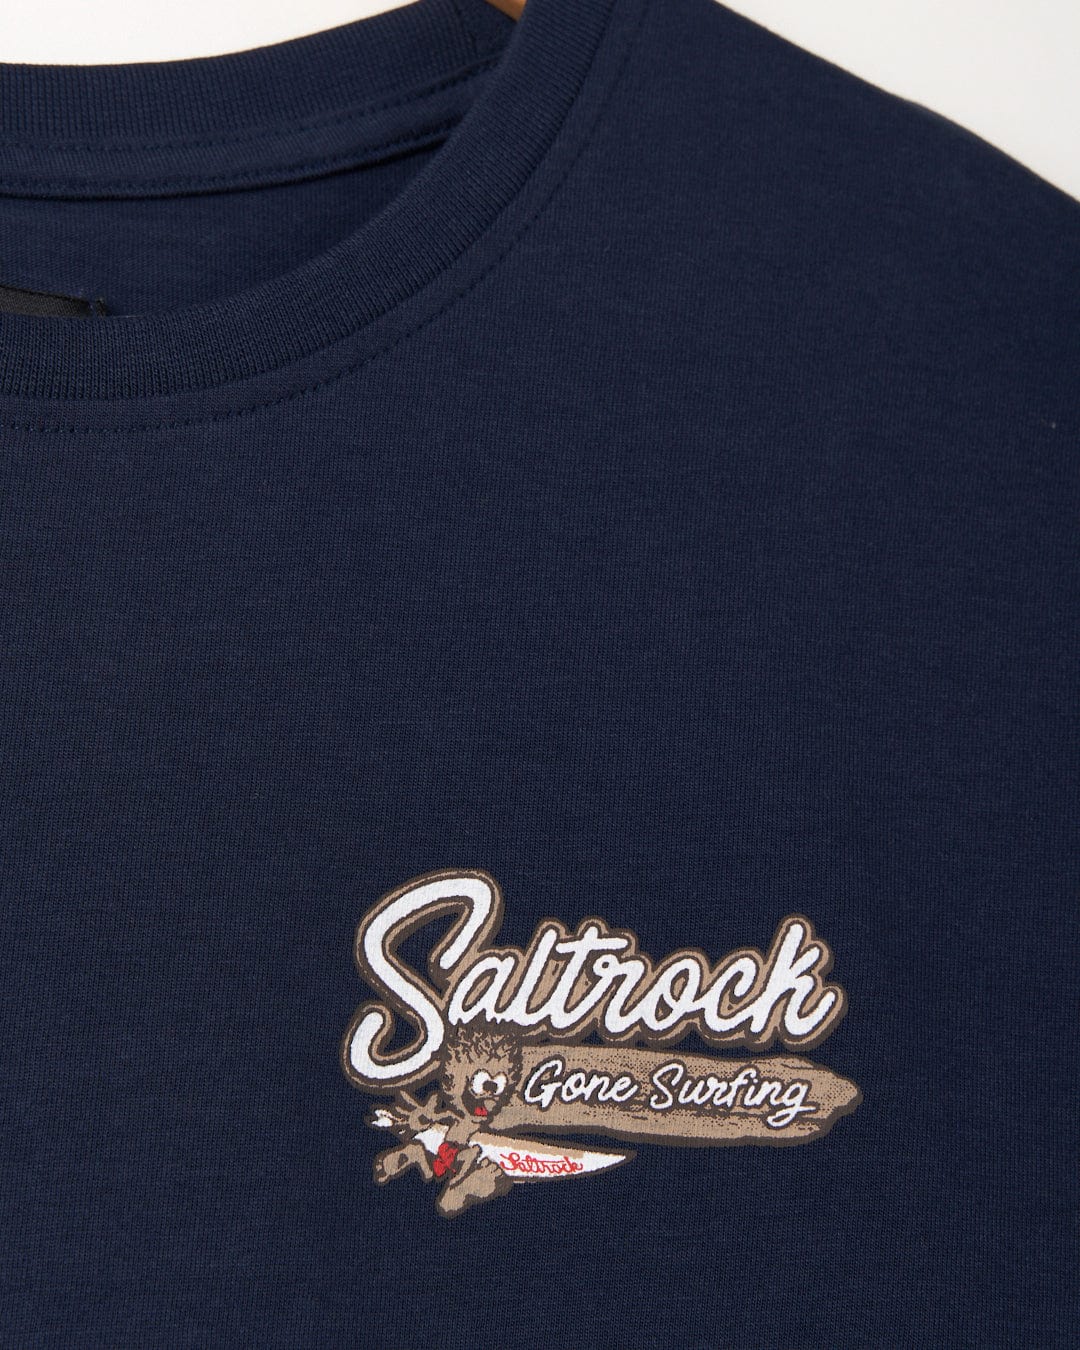 This Beach Signs Wales - Mens Short Sleeve T-Shirt - Blue features the Saltrock branding and has a soft hand feel finish.